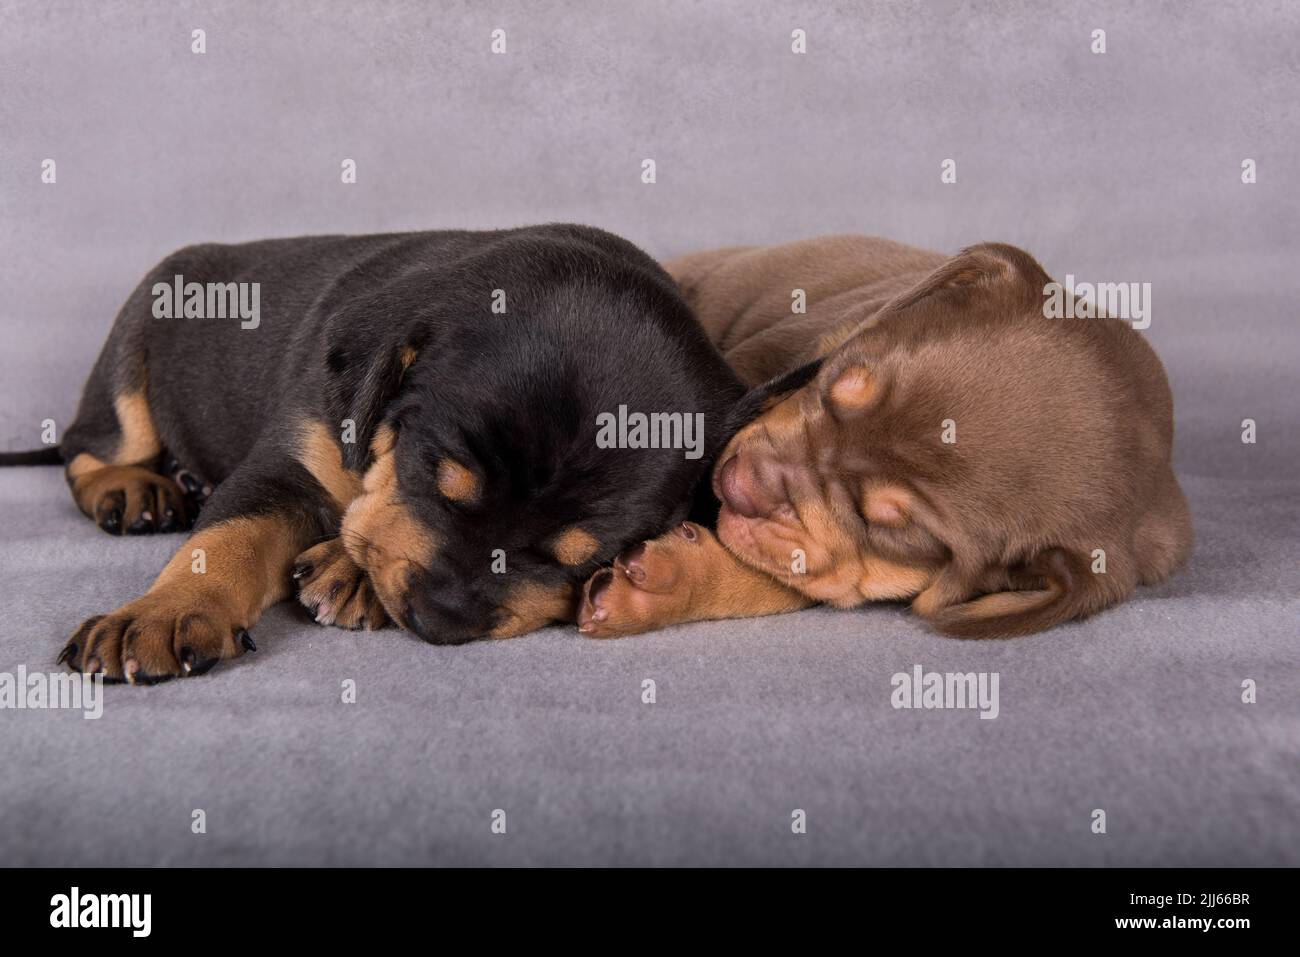 Two Louisiana Catahoula Leopard Dogs puppies on gray background Stock Photo